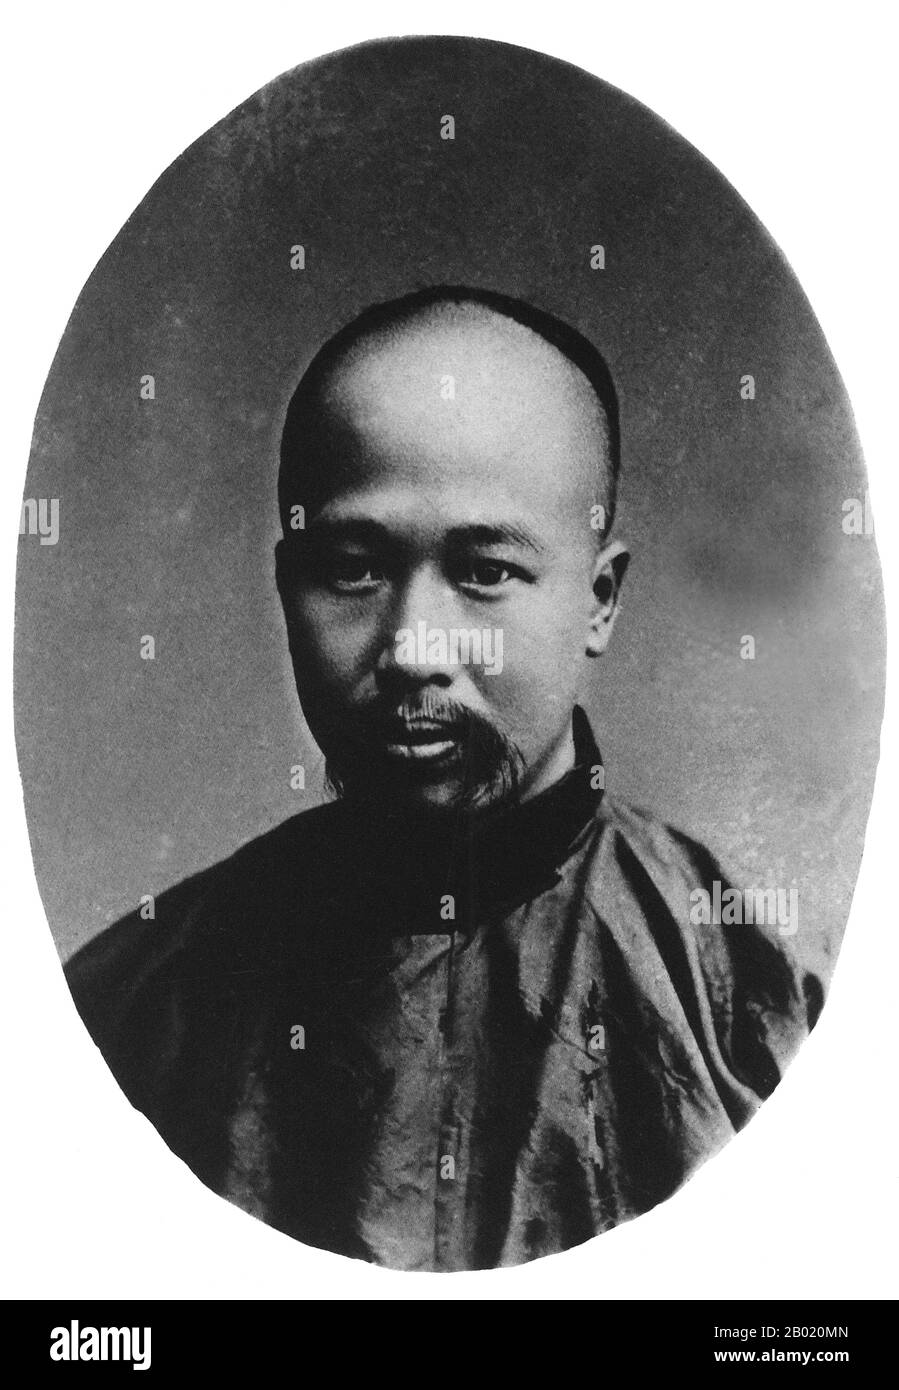 Kang Youwei (simplified Chinese: 康有为; traditional Chinese: 康有為; pinyin: Kāng Yǒuwéi; Wade-Giles: K'ang Yu-wei; March 19, 1858–March 31, 1927), was a Chinese scholar, noted calligrapher and prominent political thinker and reformer of the late Qing Dynasty.  He led movements to establish a constitutional monarchy and was an ardent Chinese nationalist. His ideas inspired a reformation movement that was supported by the Guangxu Emperor but loathed by Empress Dowager Cixi. Although he continued to advocate for constitutional monarchy after the foundation of the Republic of China, Kang's political i Stock Photo